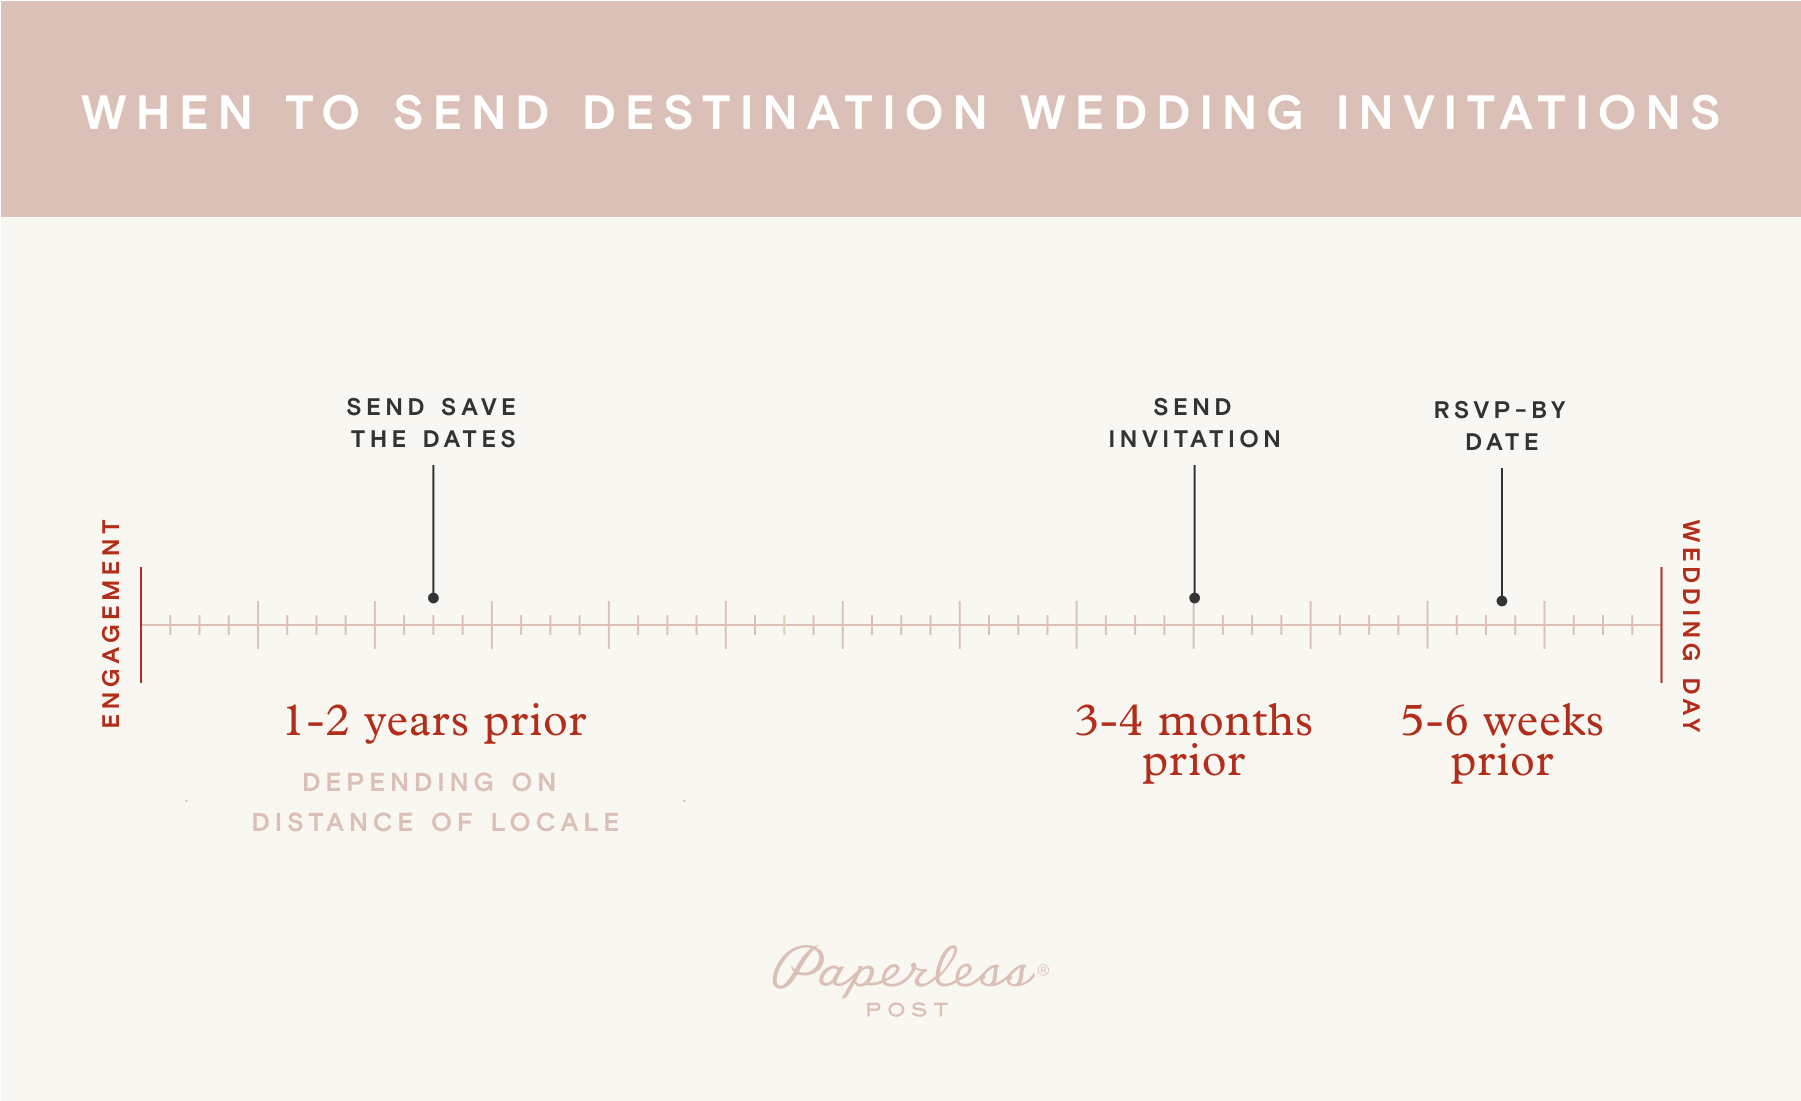 A timeline depicts the optimal time to send save the dates and invitations for a destination wedding.